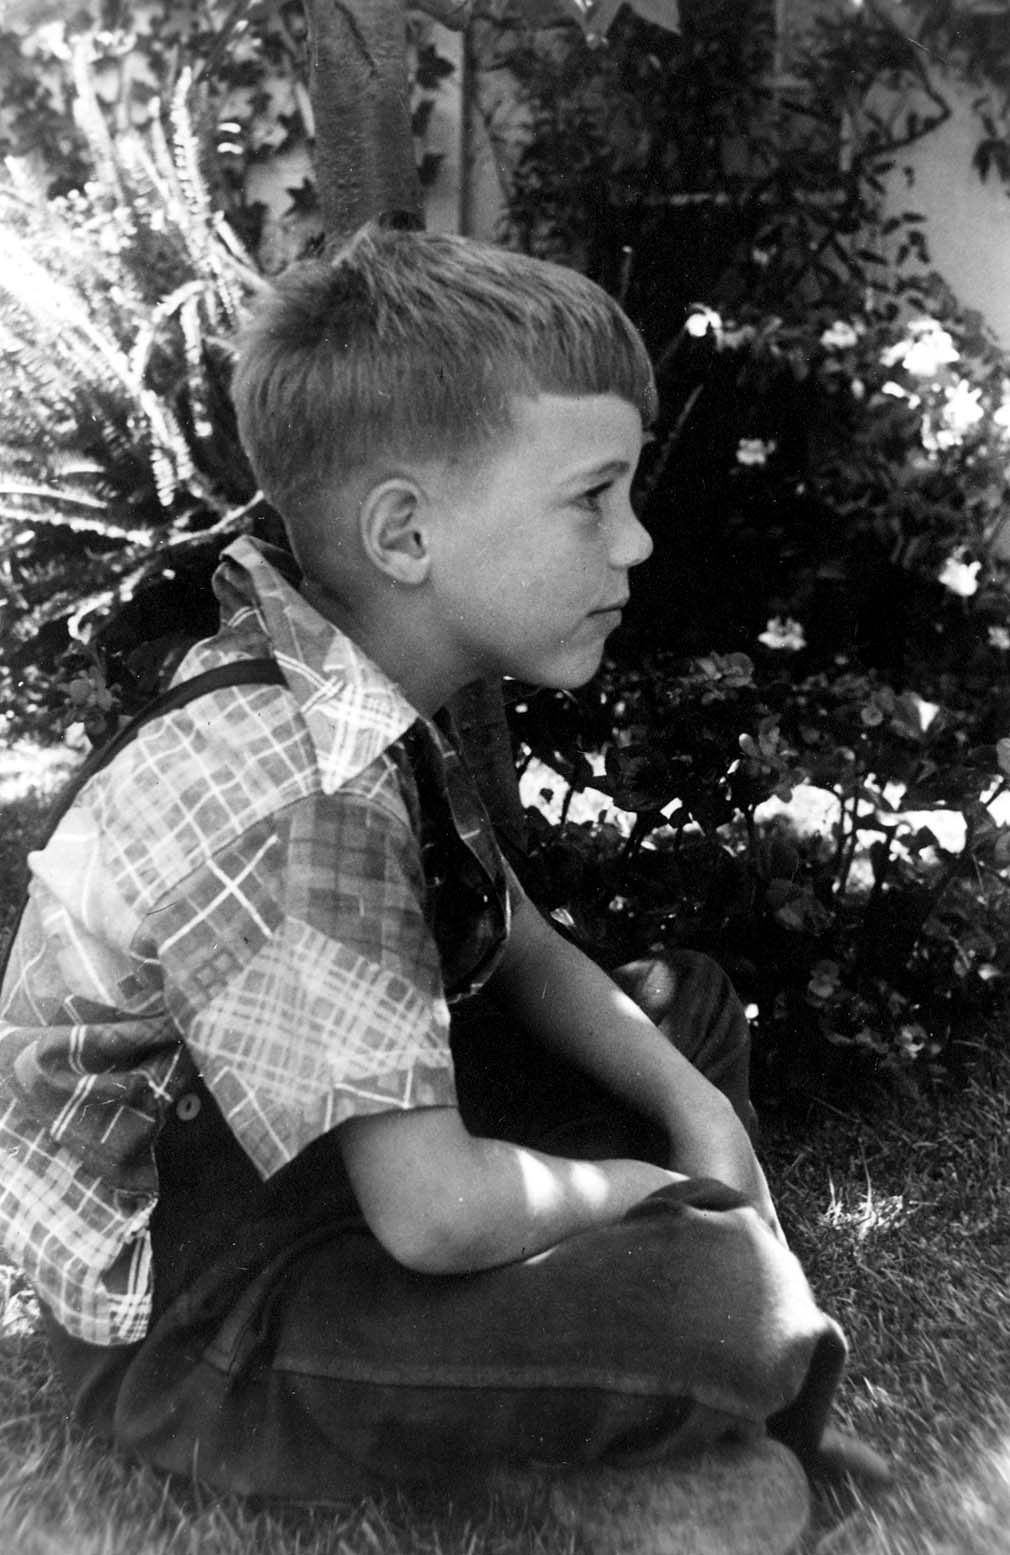 Vintage black and white photo of young boy Don Hall, Jr at the Hall home in Point Loma, San Diego, California. Photo taken by Donald Hall, engineer of the Spirit of St. Louis